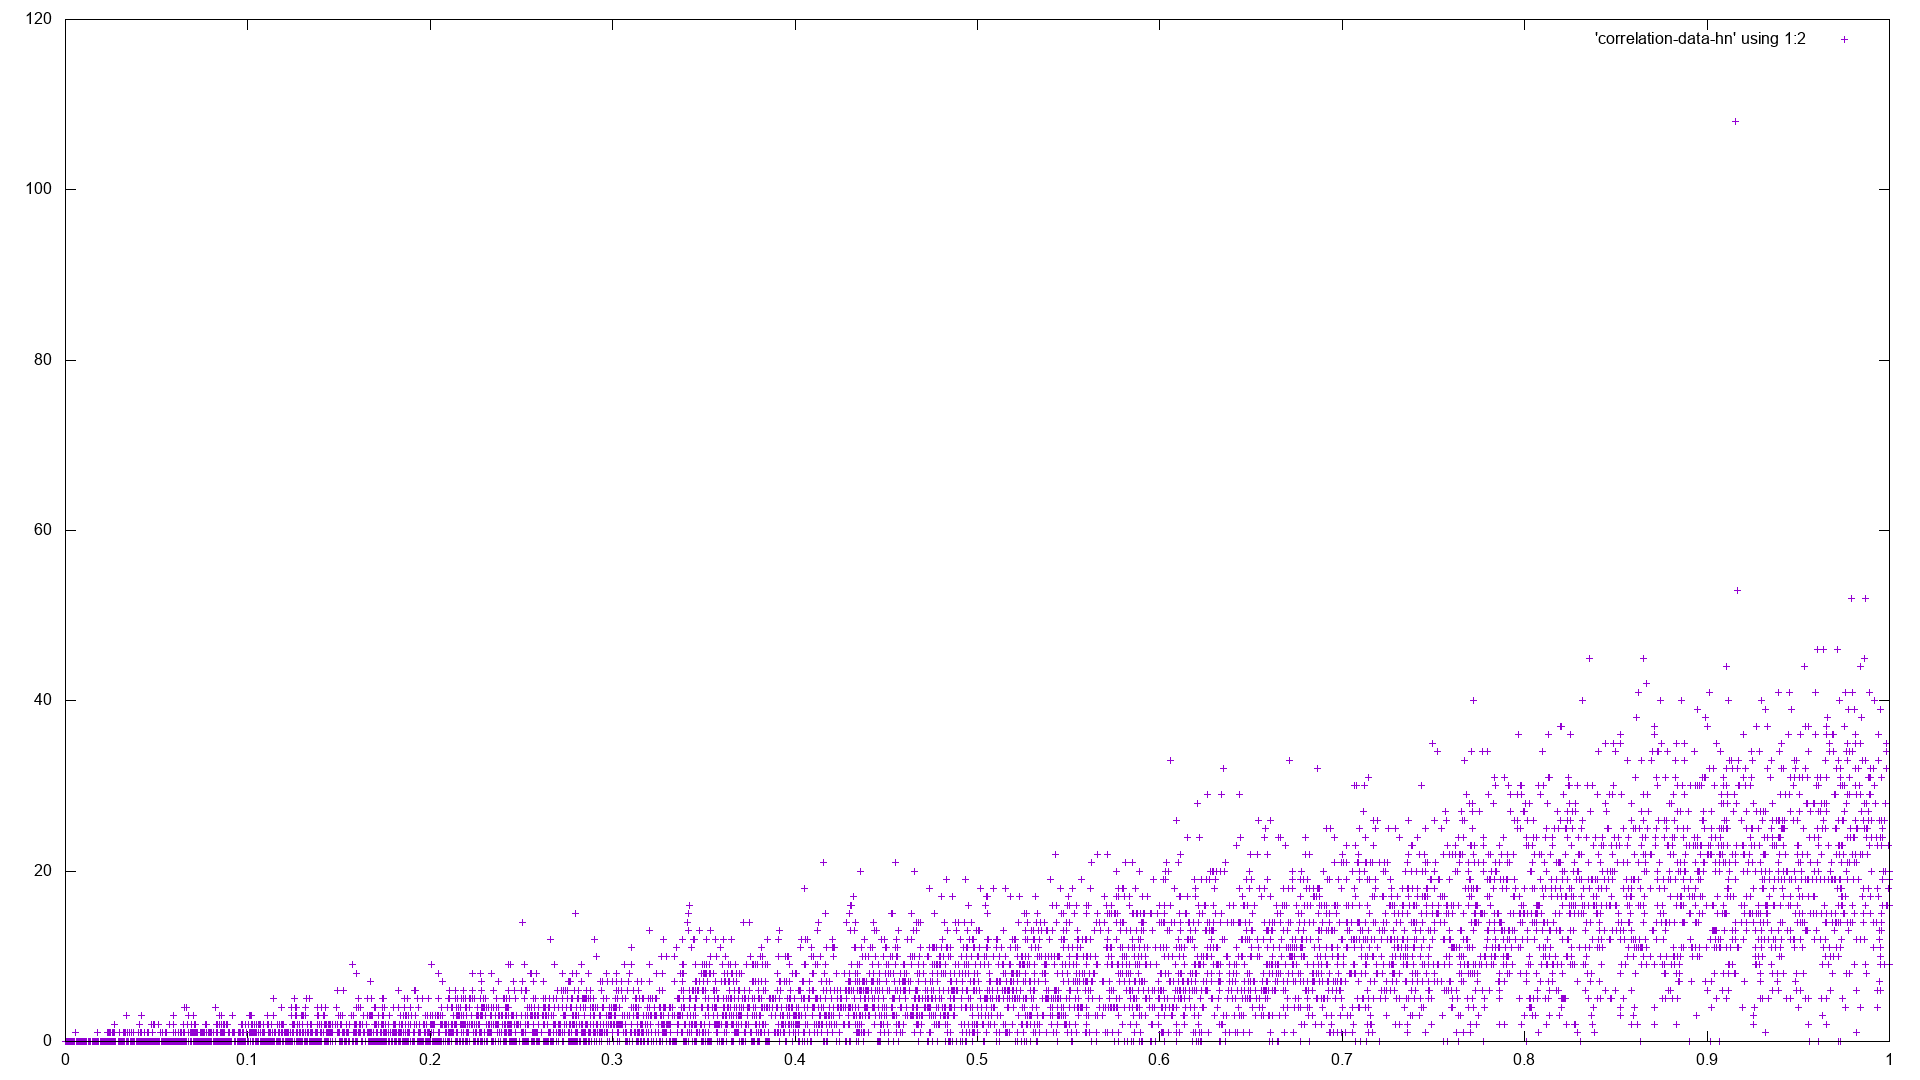 Scatterplot with quality on x-axis (0-1) and upvotes on y-axis (0-120). The points roughly describe a filled triangle from (0 quality,0 upvotes) over (1 quality, 0 upvotes) to about (1 quality, 40 upvotes).